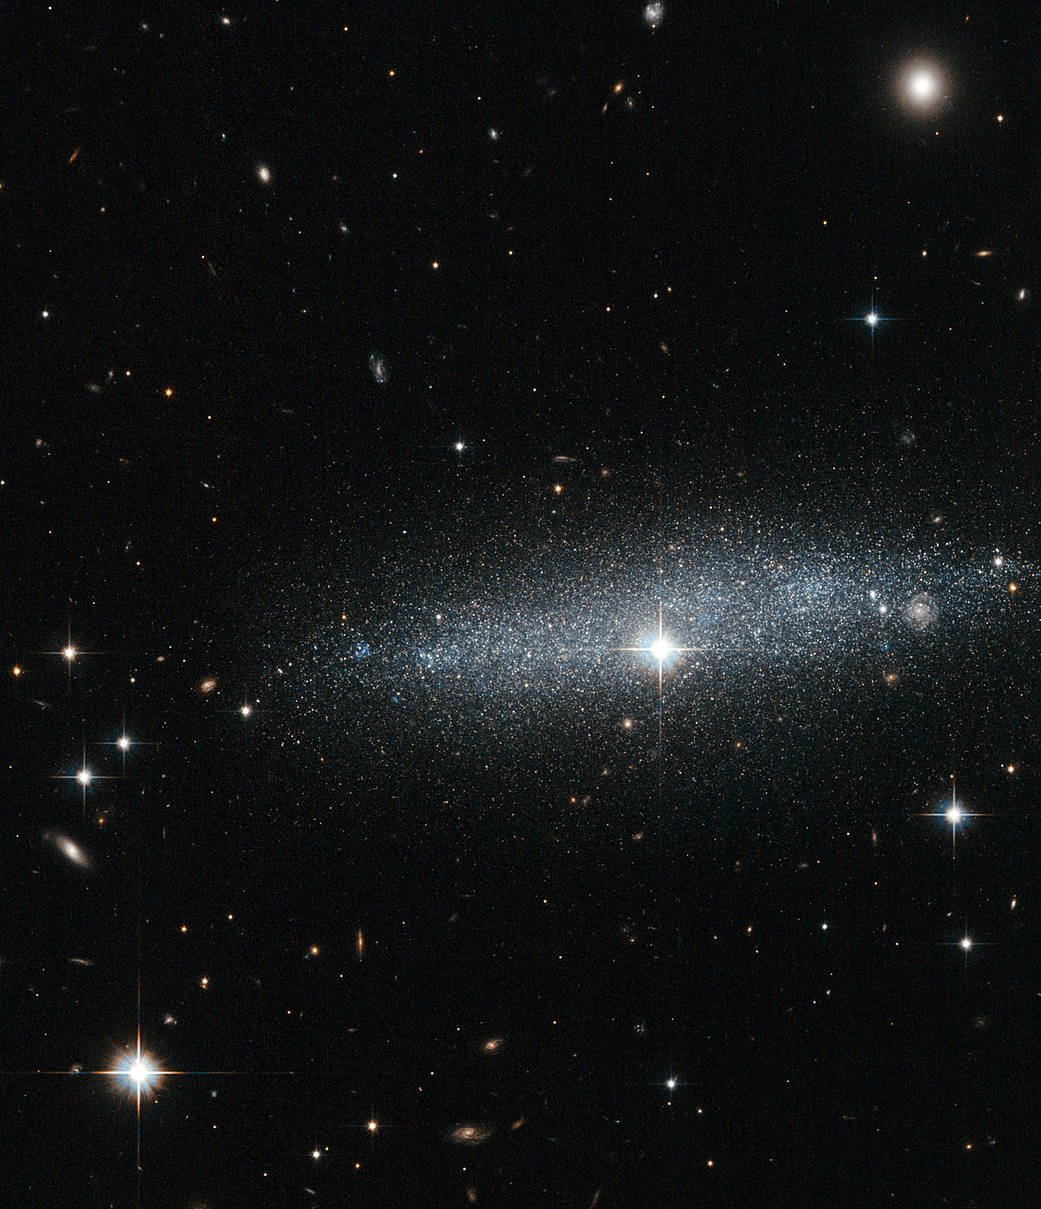 A wide view of the dwarf Glitter Galaxy with bright stars around.